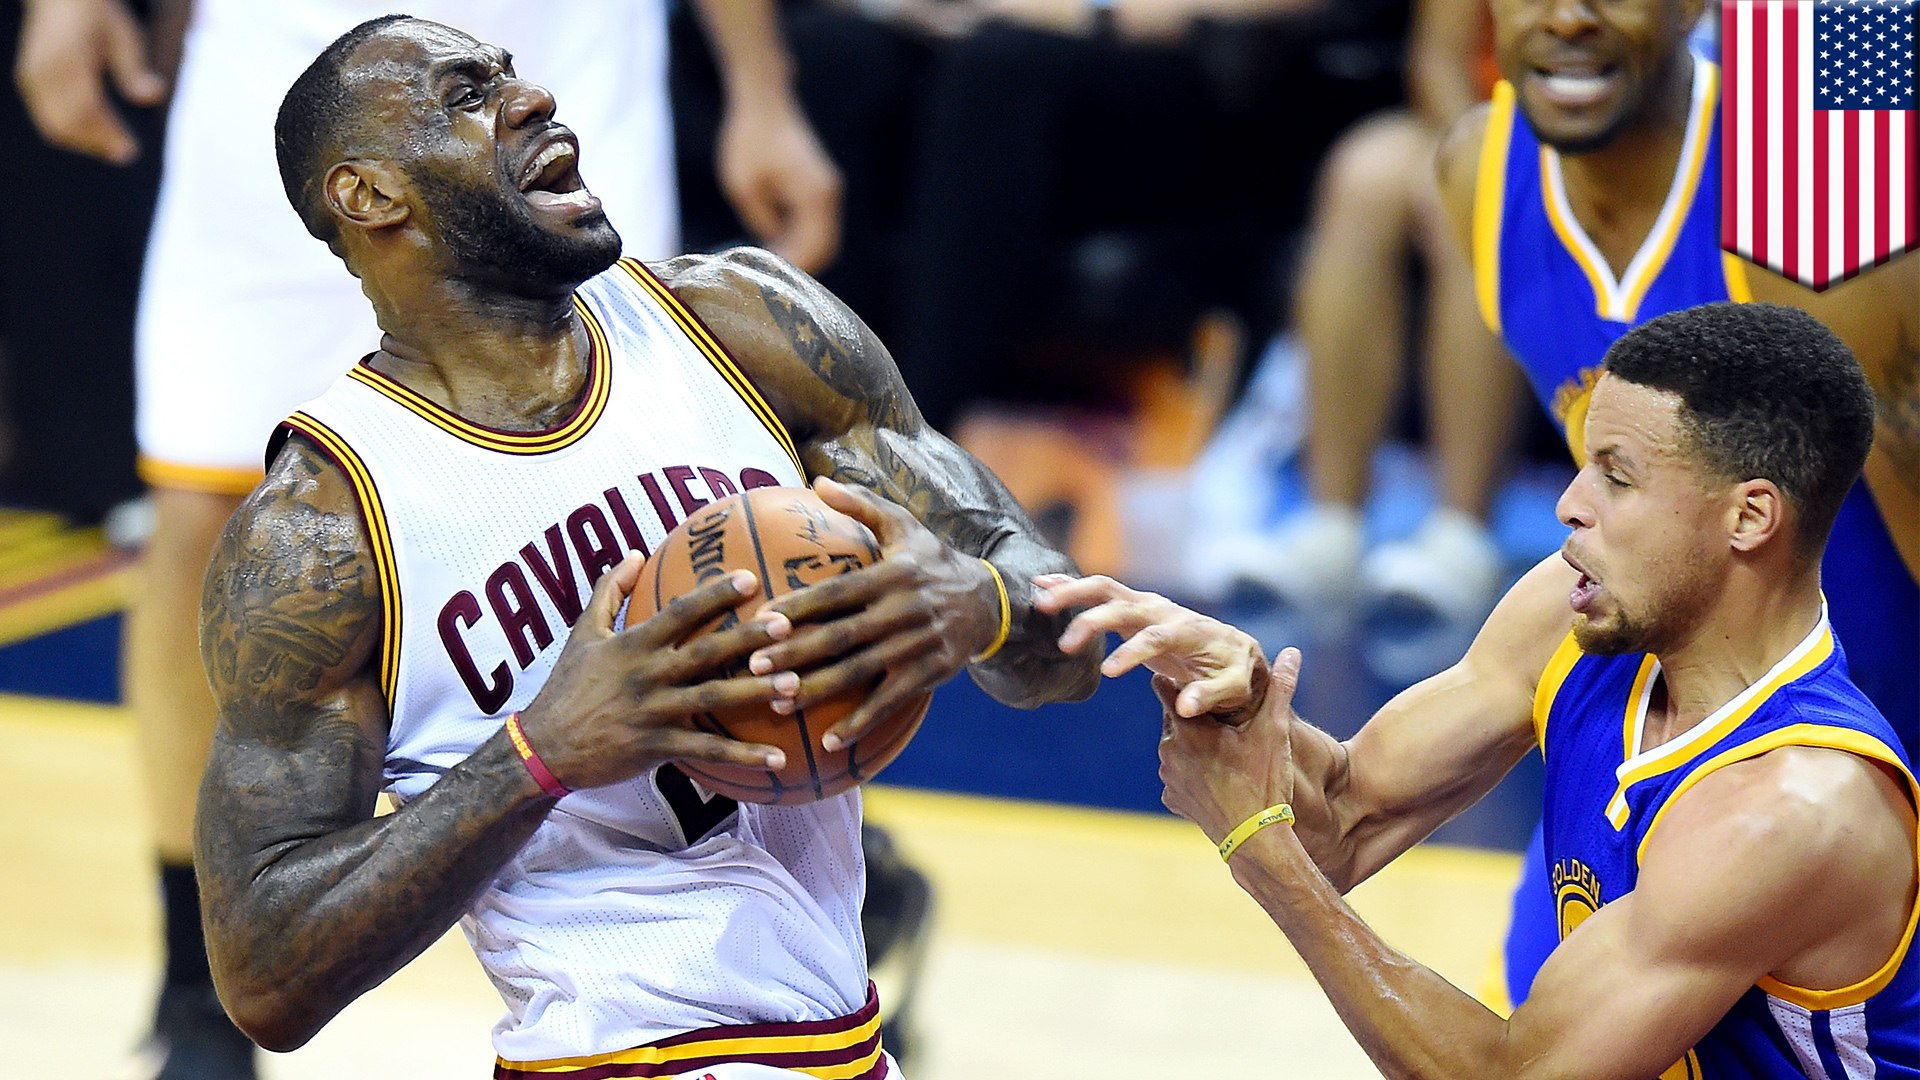 NBA Finals: Steph vs. LeBron, stats battle of the best heading into Game 6